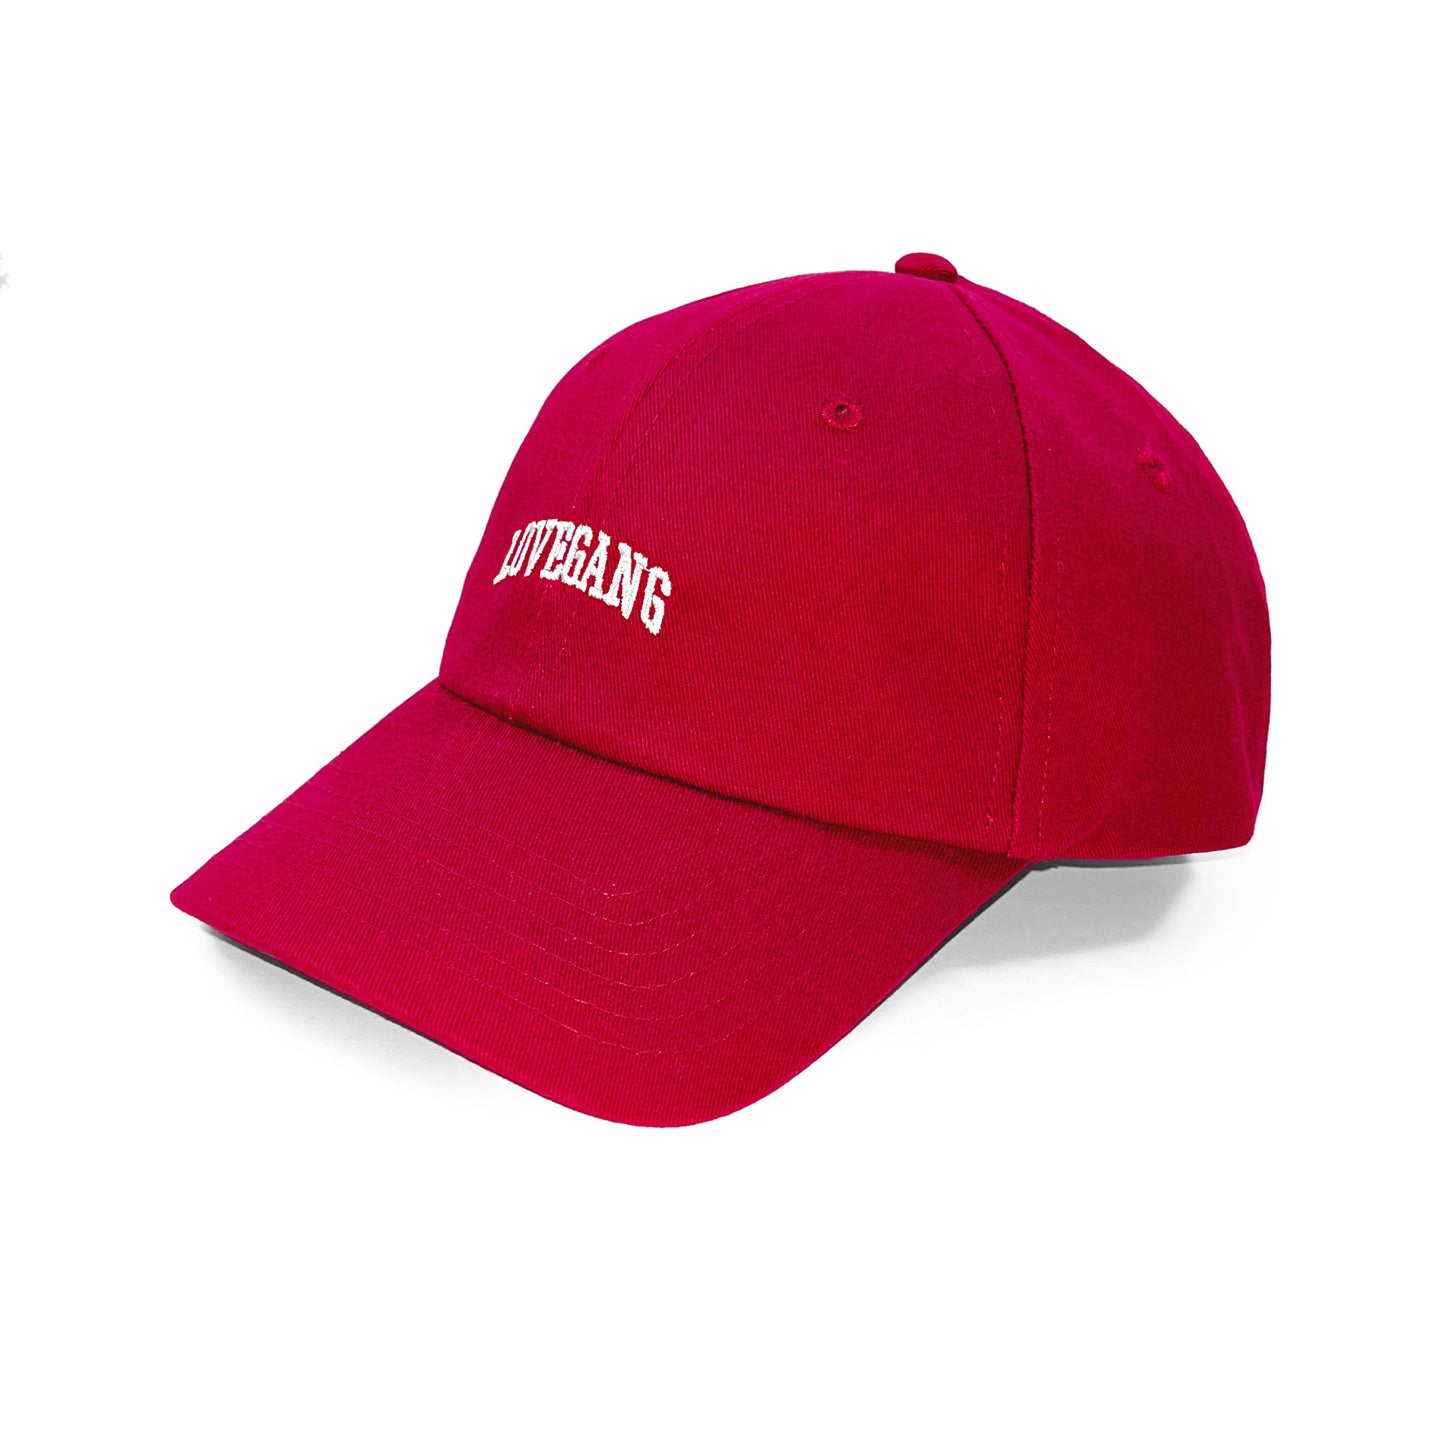 COLLEGE S/S '23 - 6 PANEL (RD)